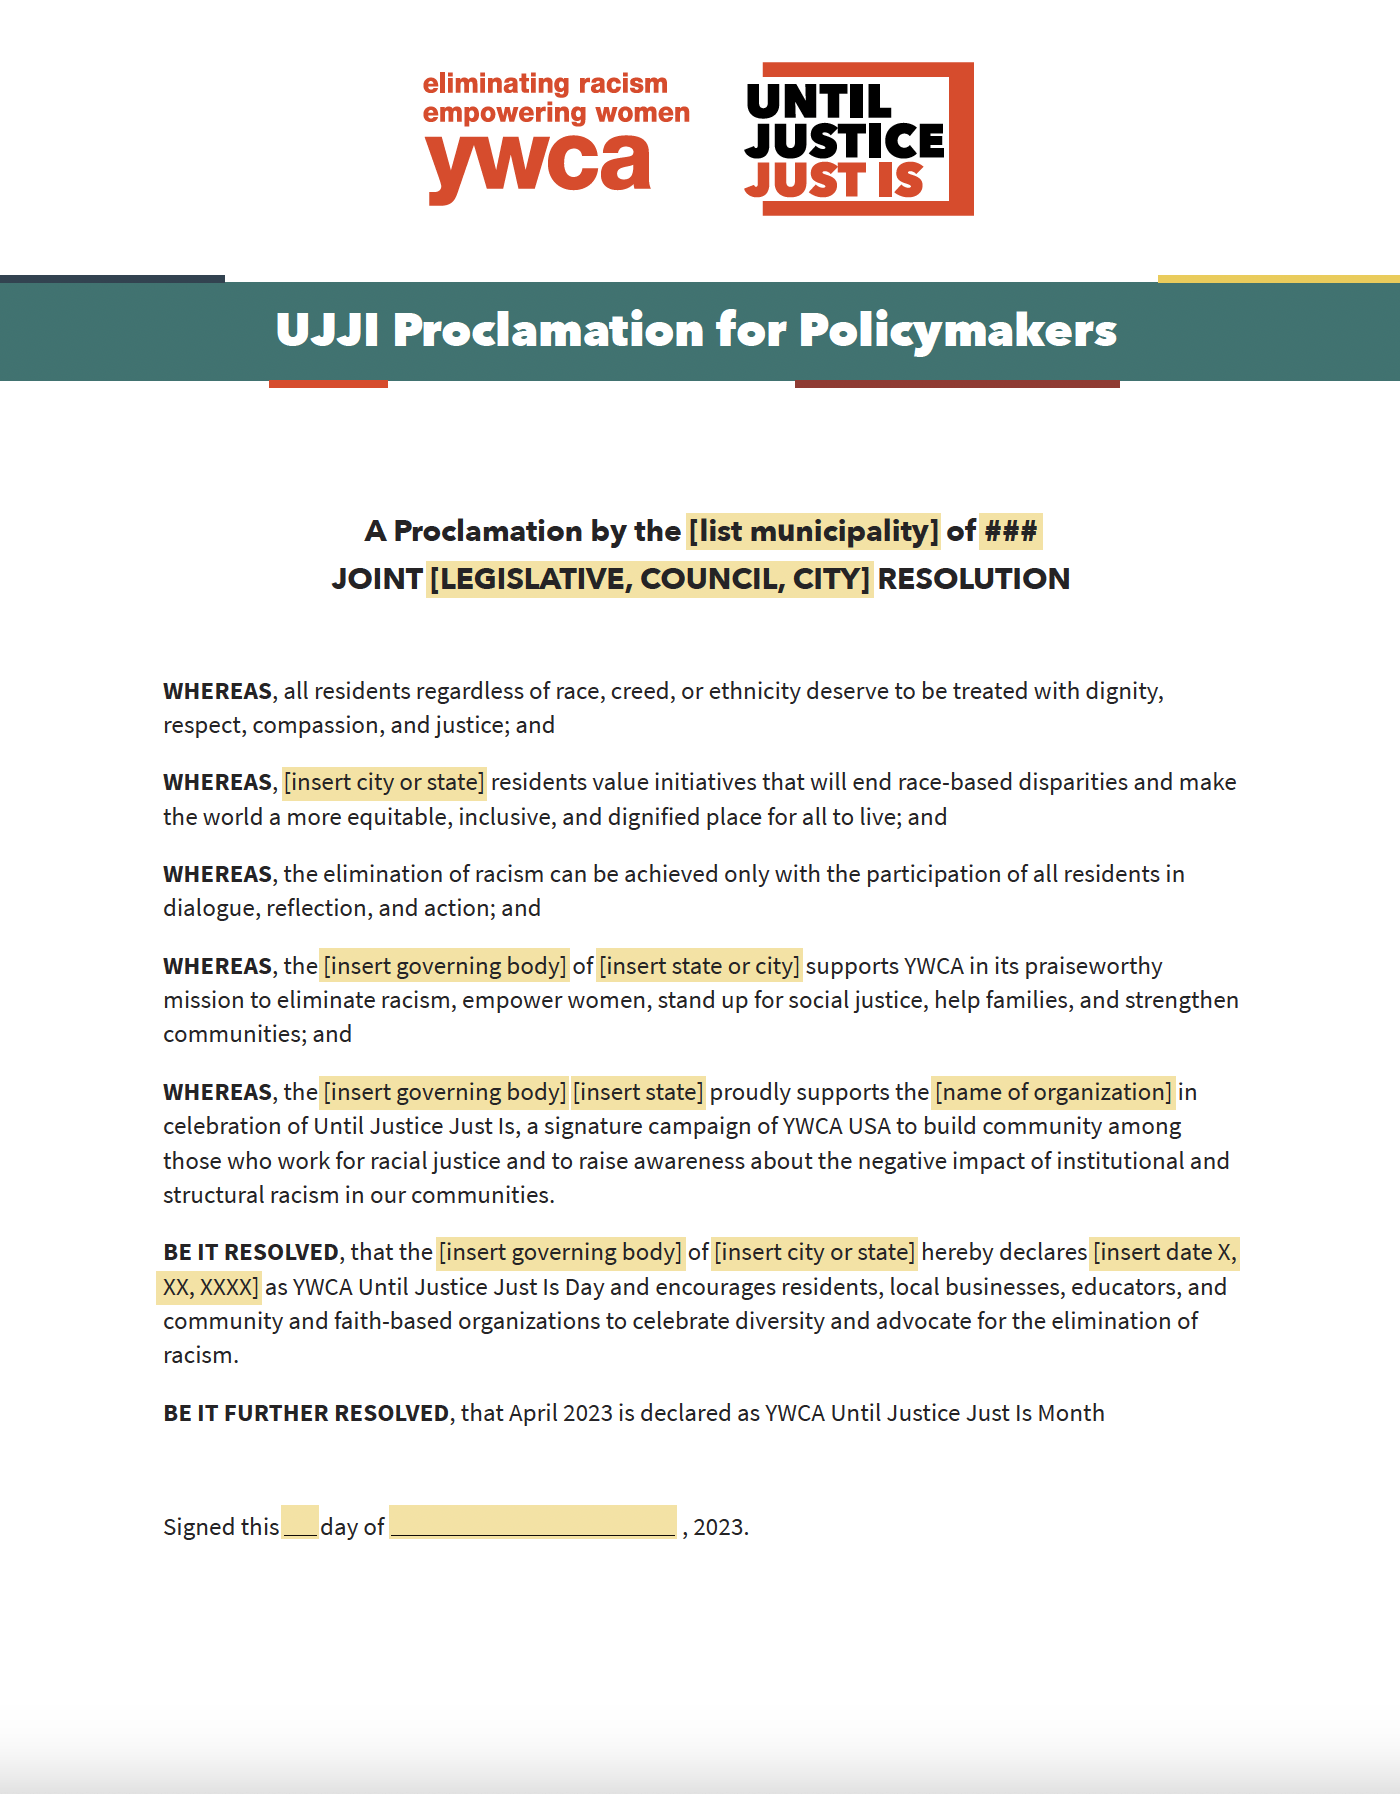 UJJI 2023 - Proclamation for Policy Makers